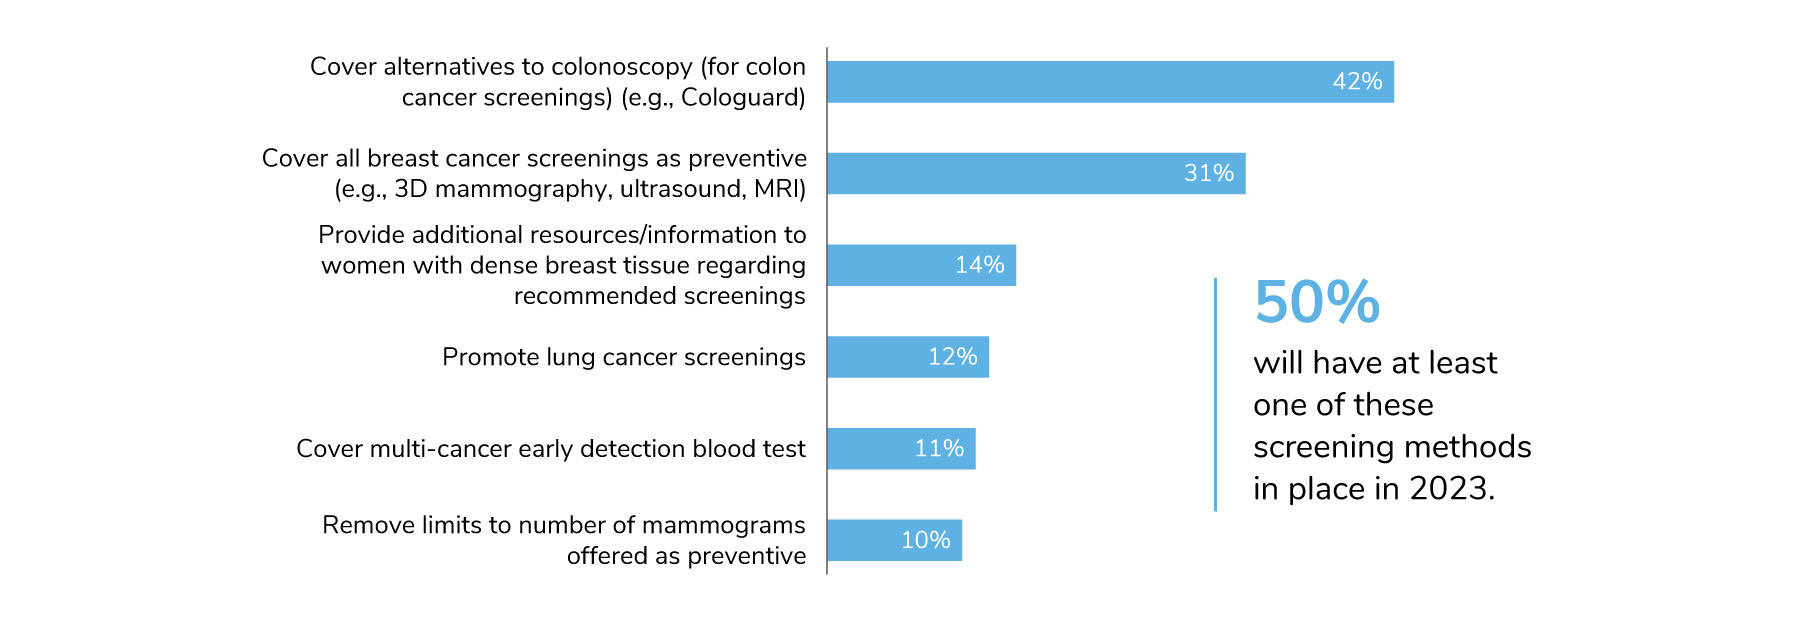 42% of employers cover alternatives to colonoscopies, and 31% cover additional breast cancer screenings as preventive.